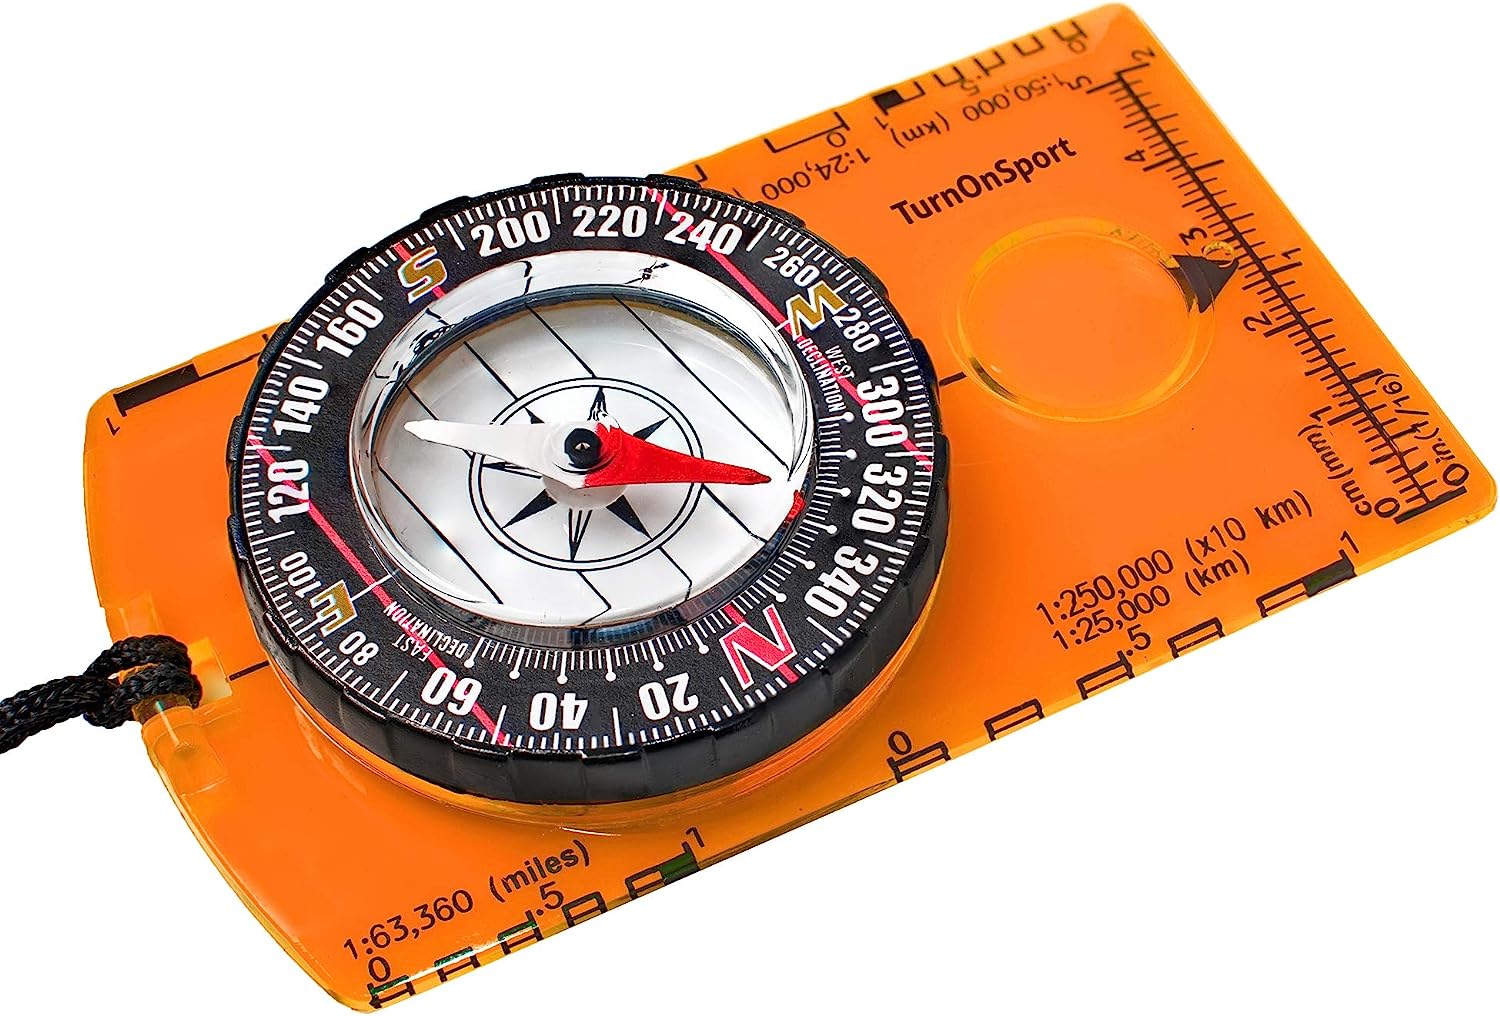 Orienteering Compass Hiking Backpacking Compass | [...]